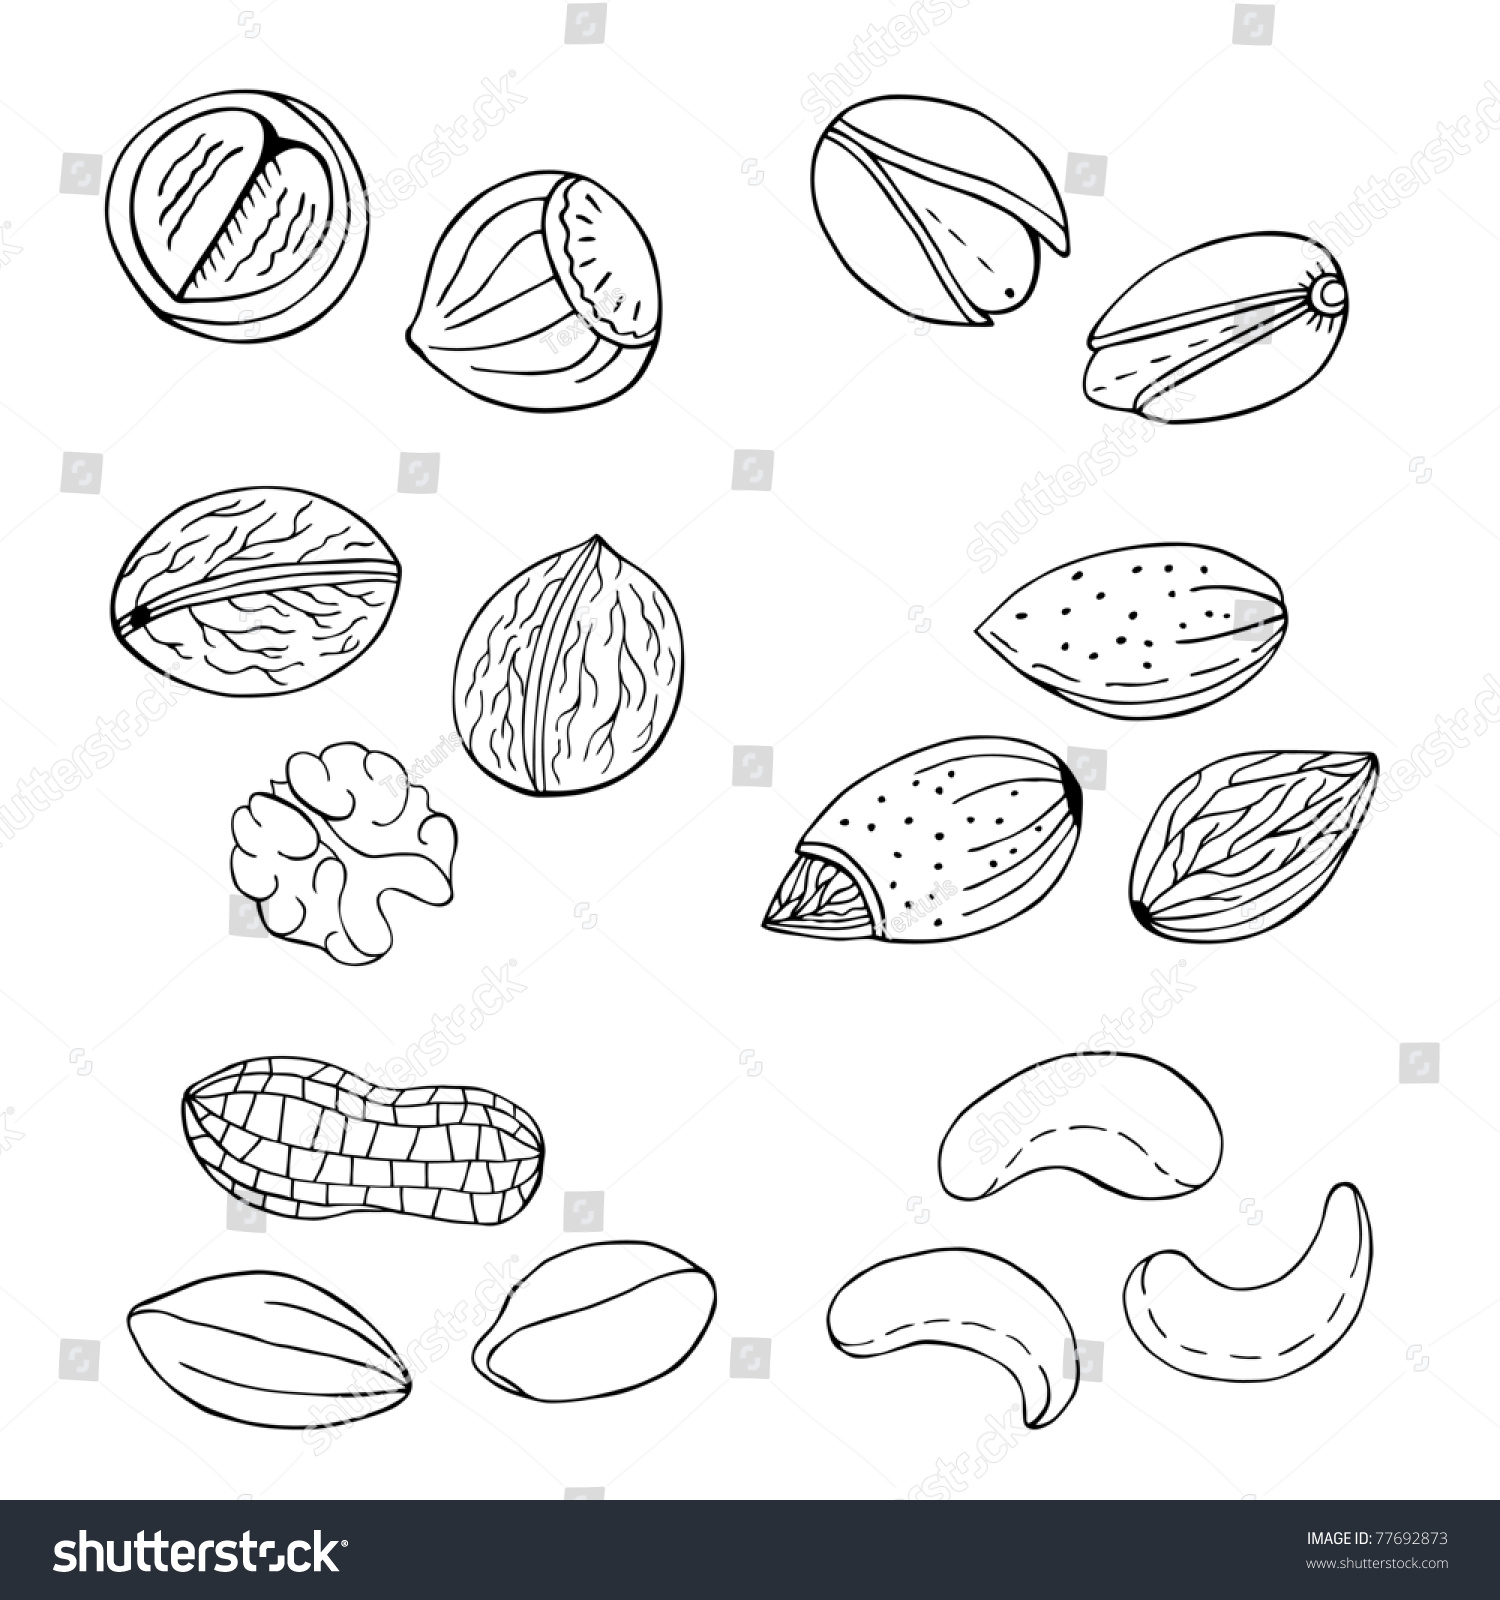 Nuts Collection Stock Vector (Royalty Free) 77692873